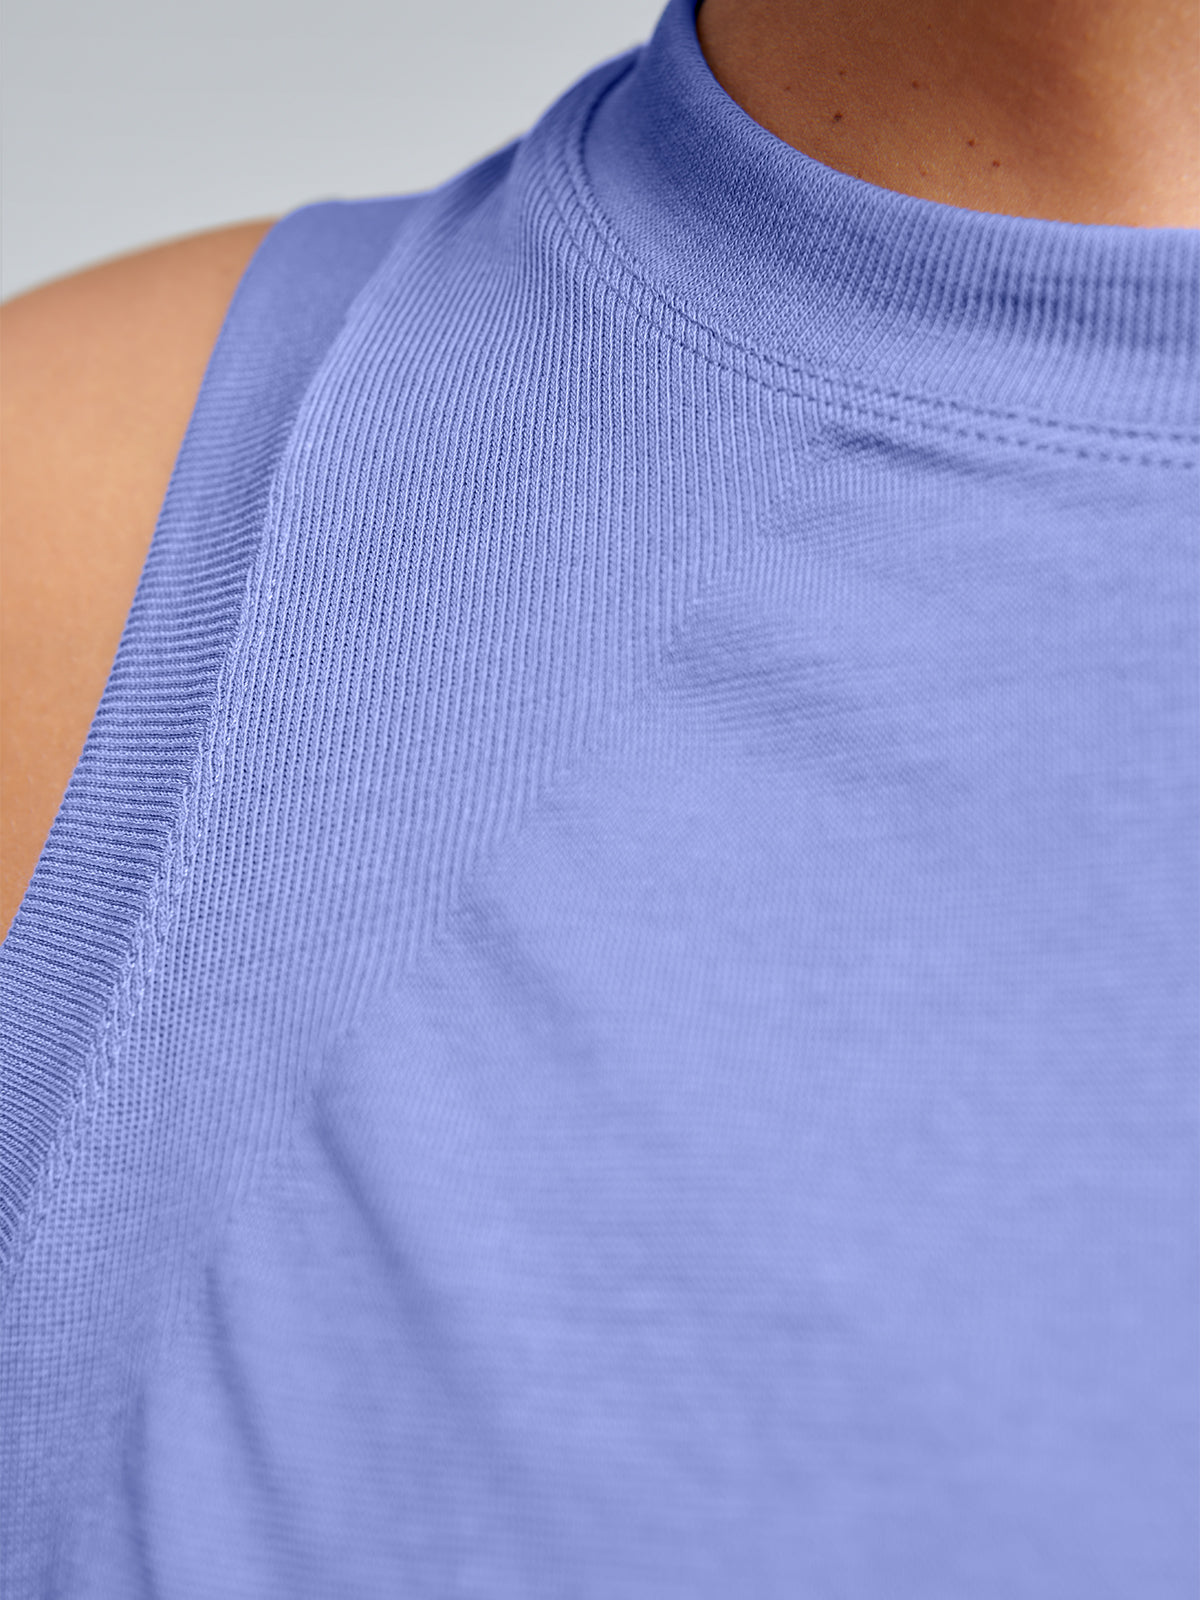 HERE TODAY Cropped Tank Blue Violet